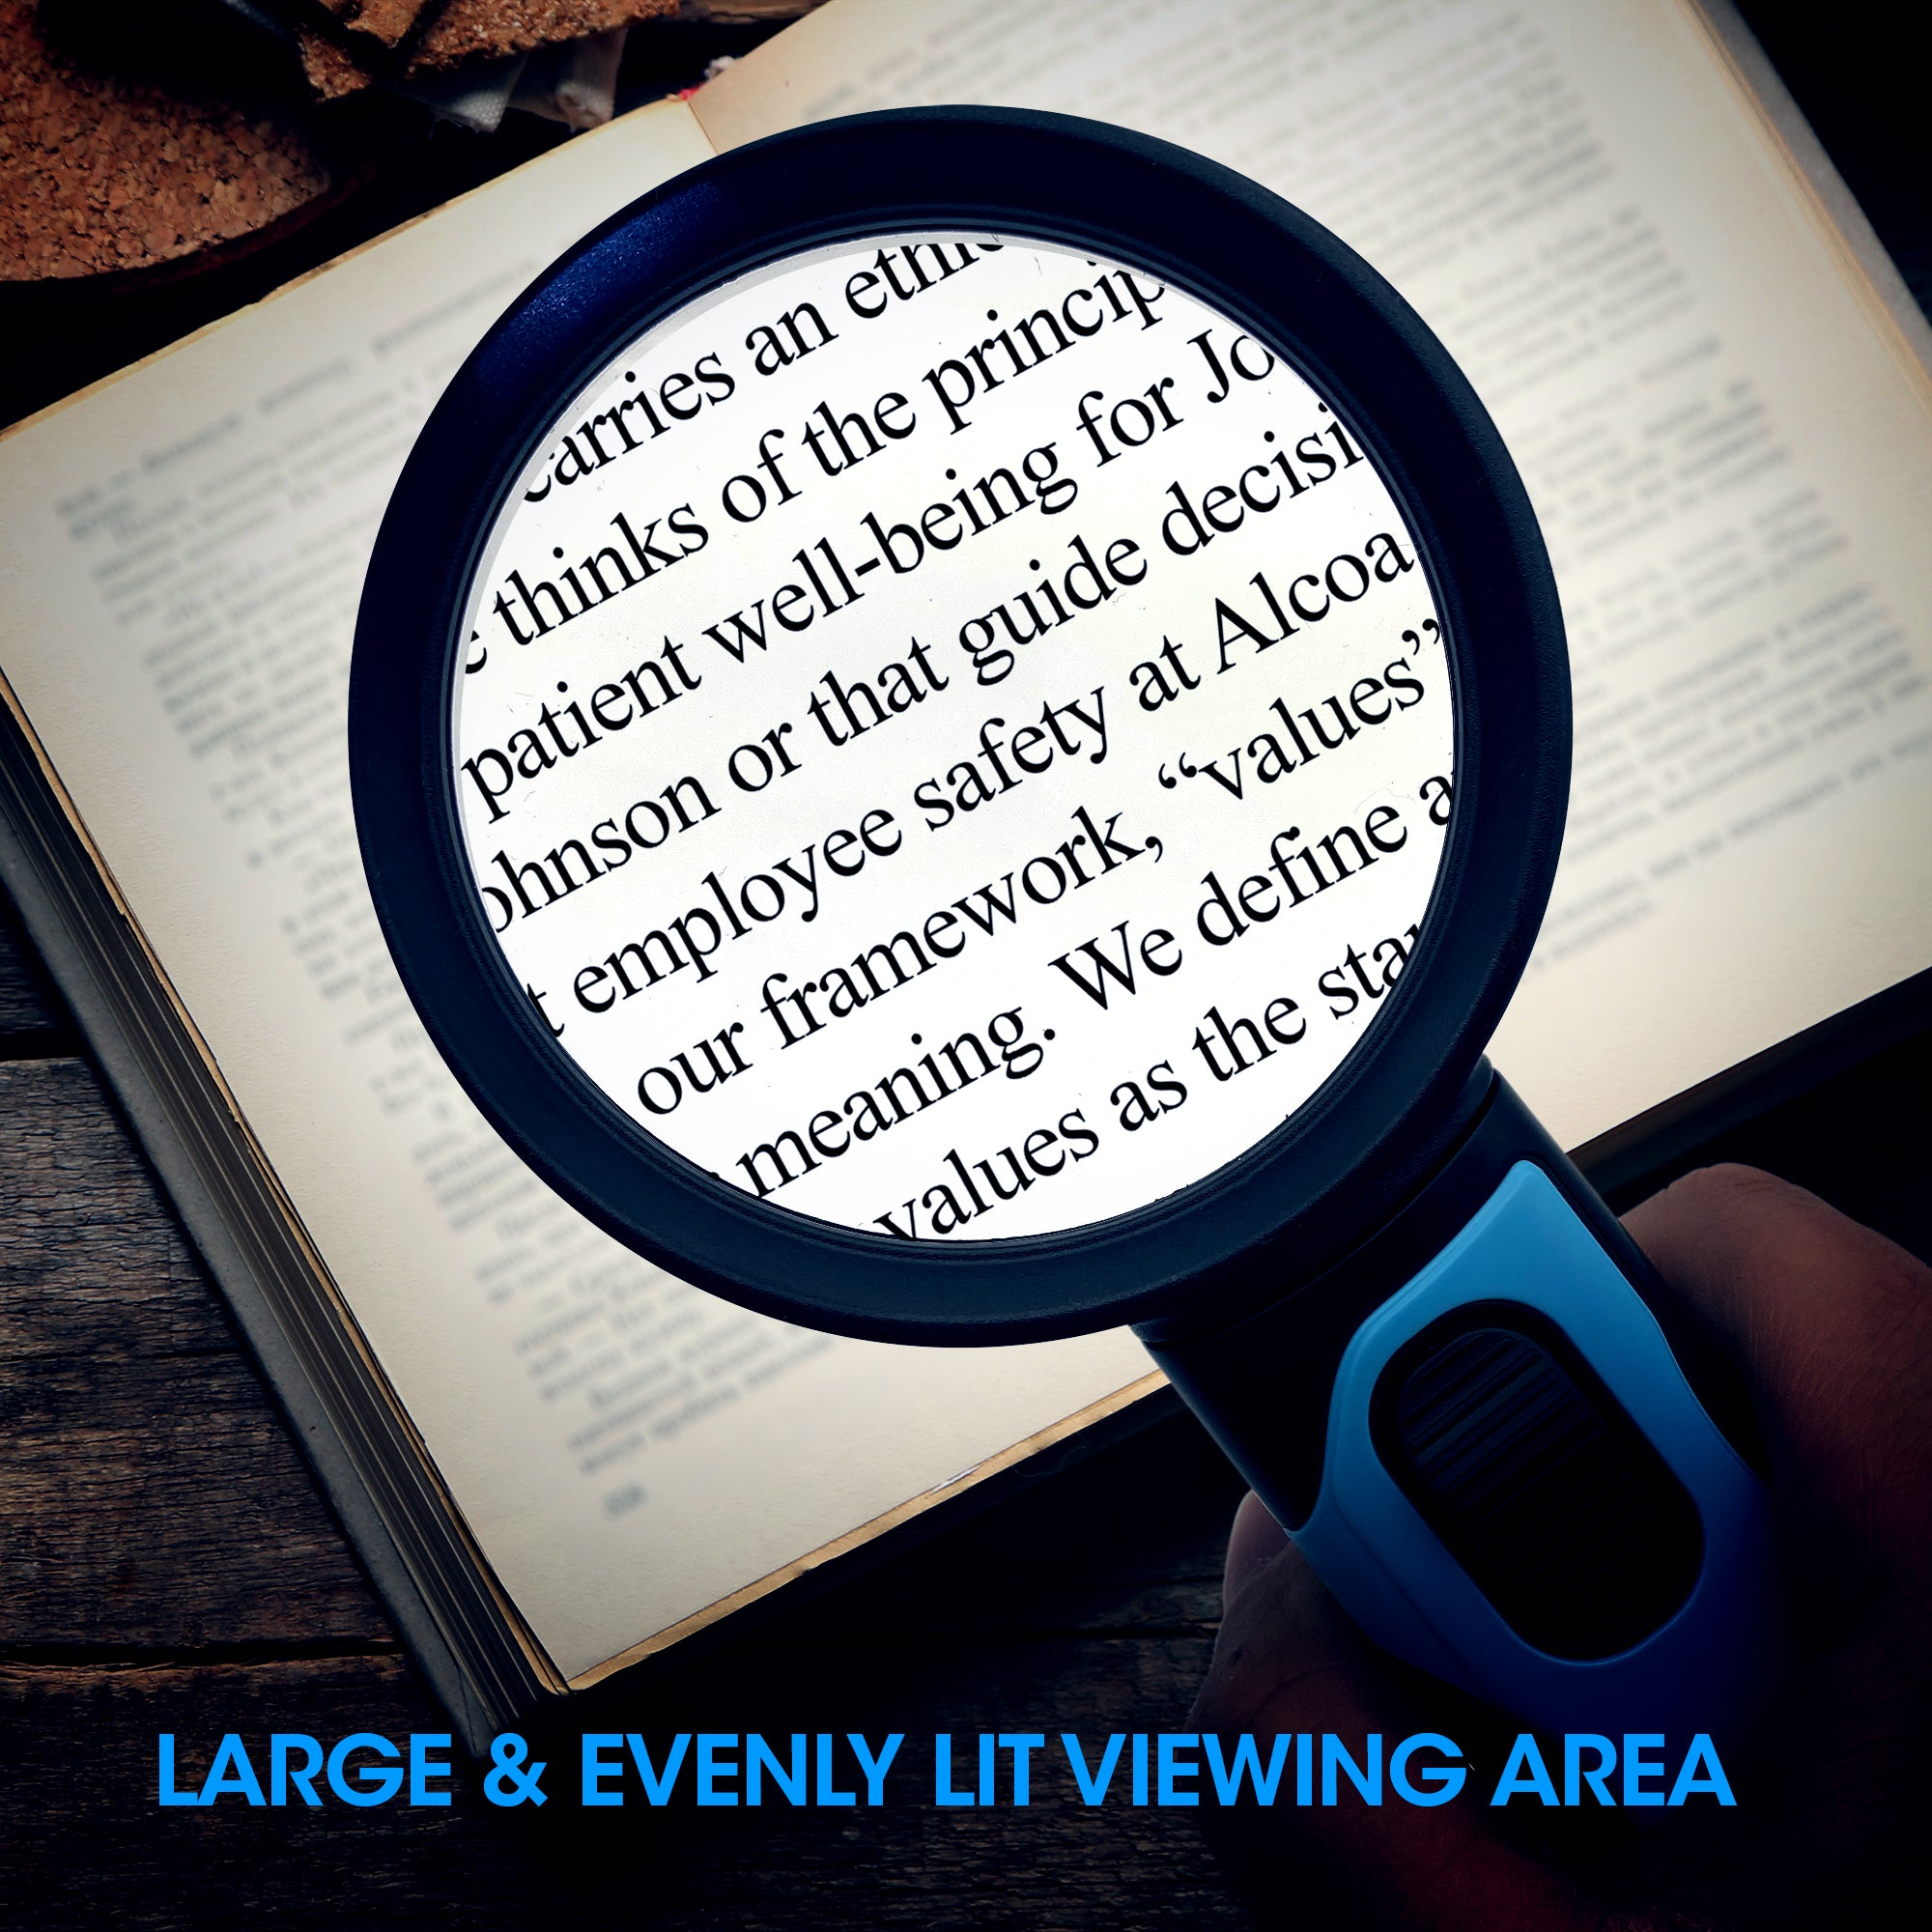 Magnifying Glass with LED Light, Lightweight Handheld Lighted 4x Magnifier  by Stalwart 